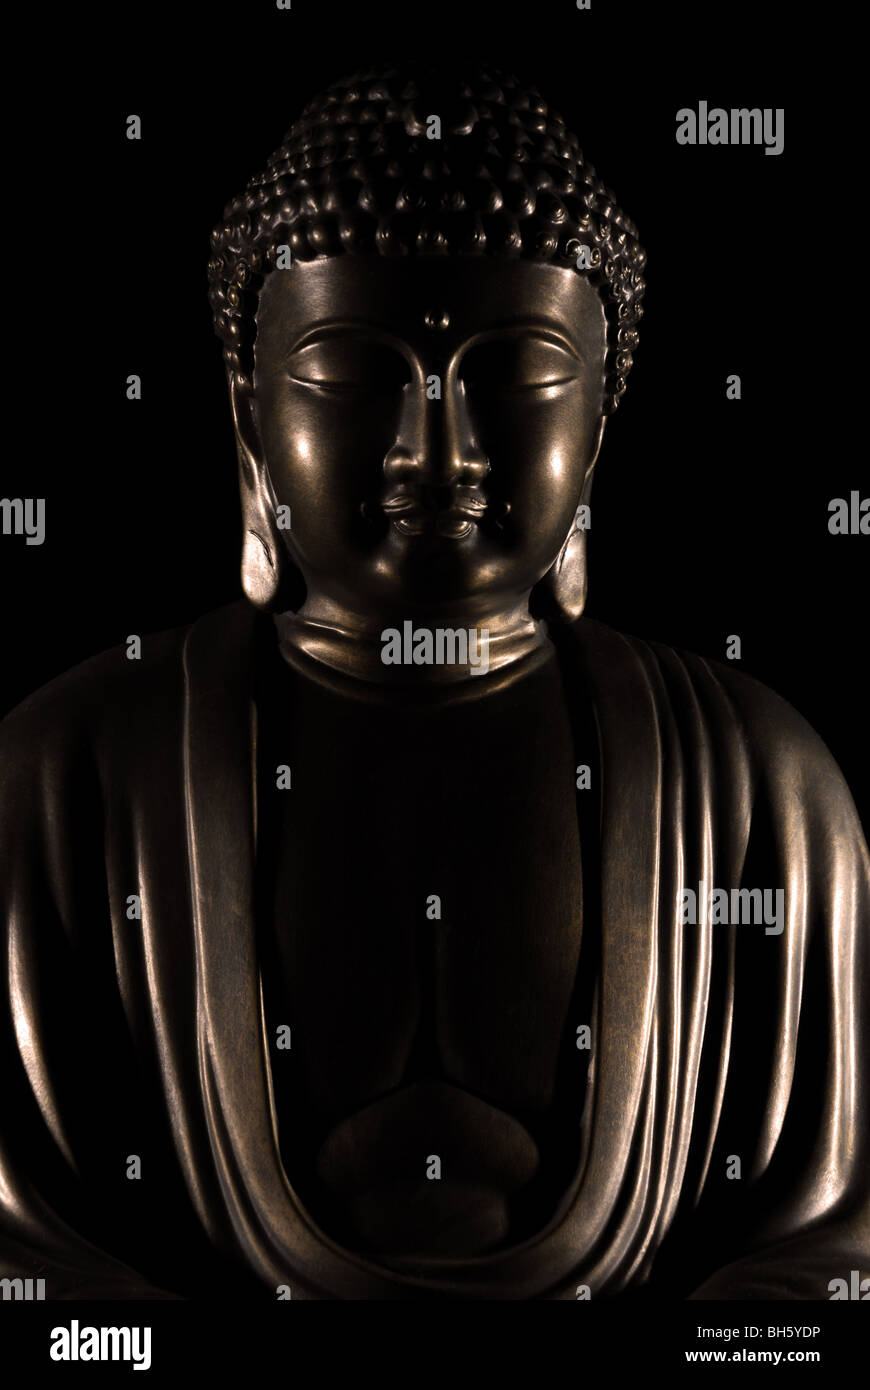 Bronze Buddha statue with a dark background and highlighted features Stock Photo